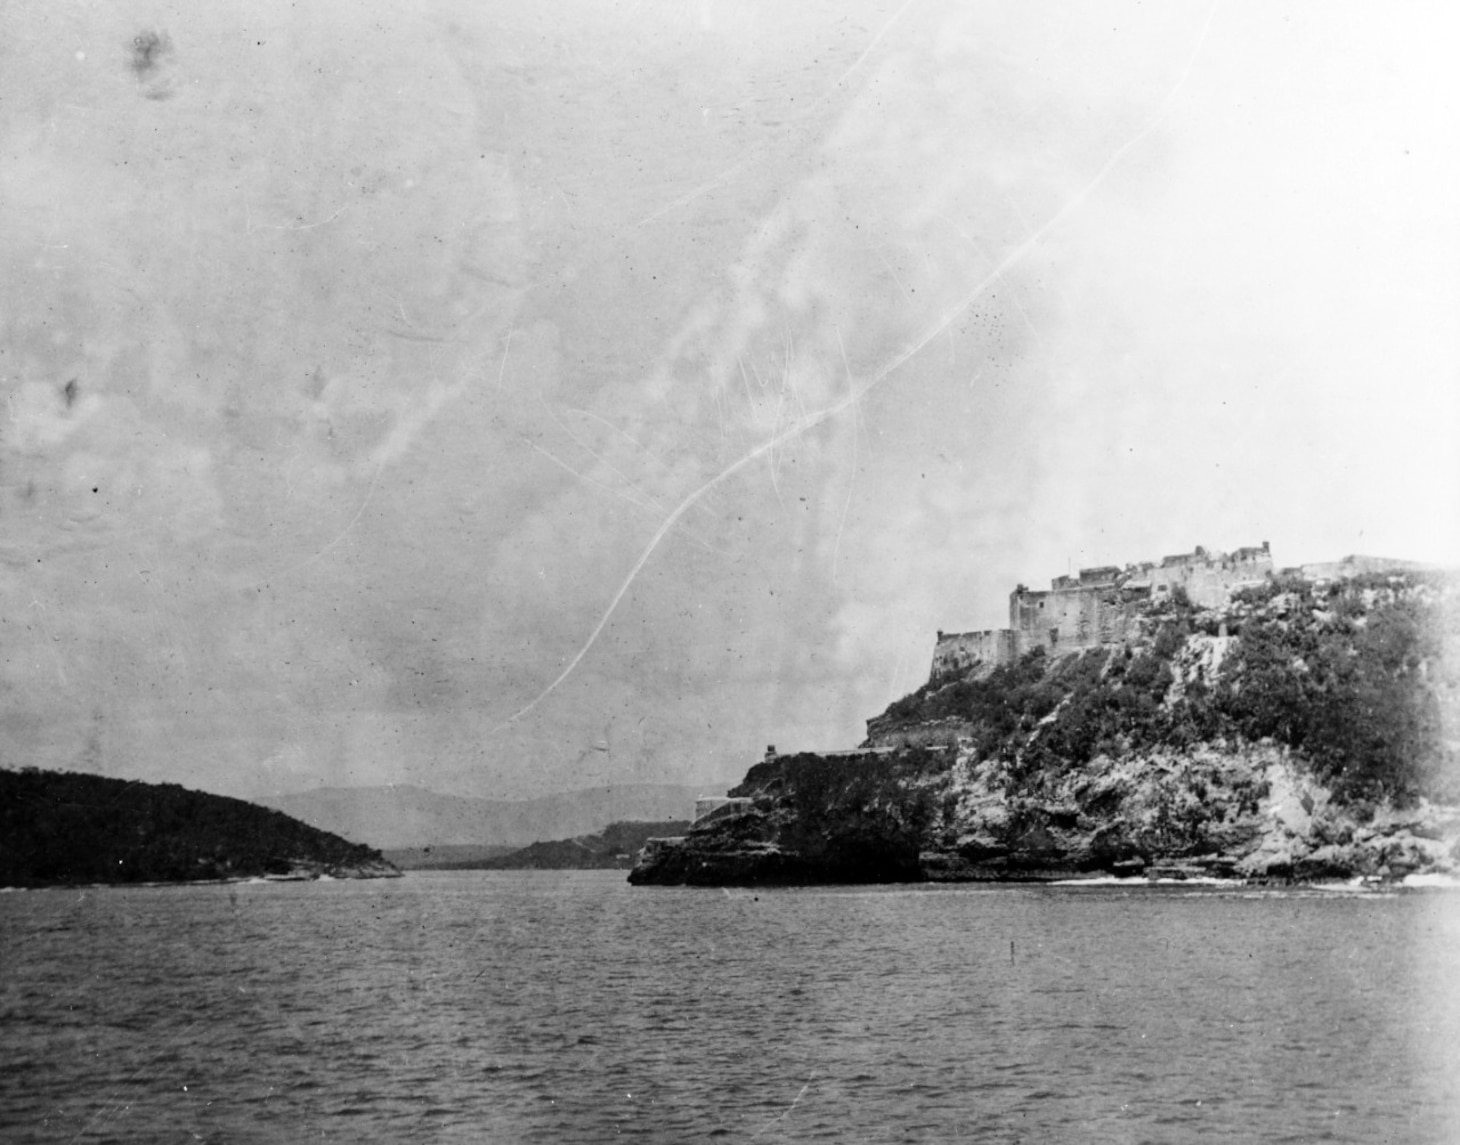 The entrance to Santiago Bay was a narrow channel guarded by the Murro Castle, visible on the right hand side of this photograph. This channel made traditional naval reconnaissance impossible. Naval History and Heritage Command Photo